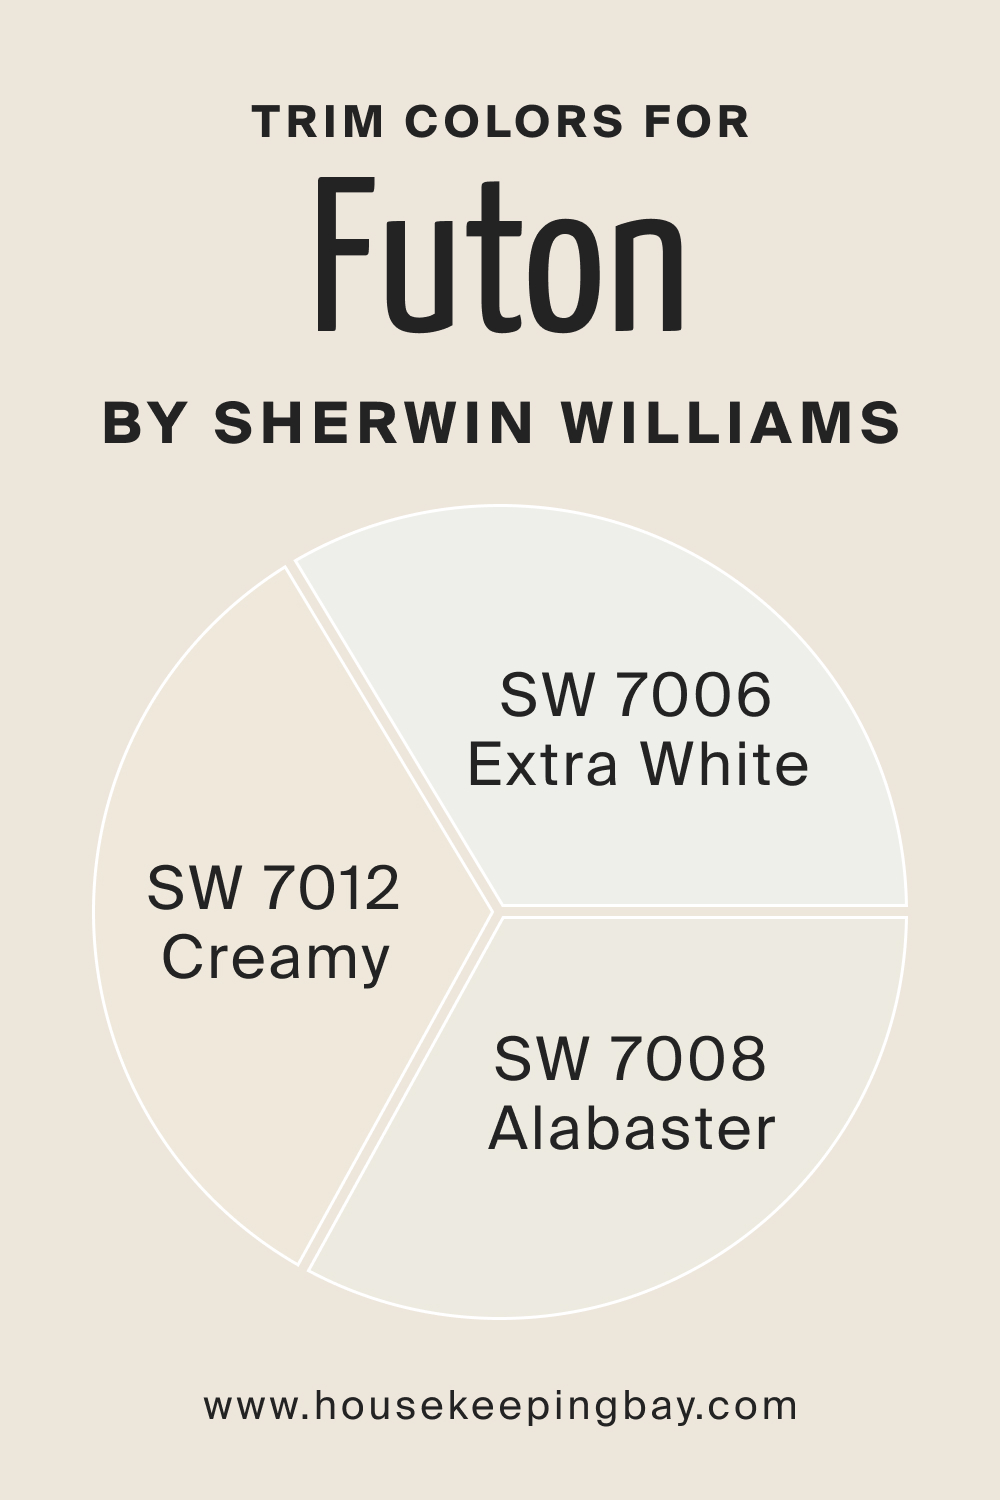 Trim Colors of SW 7101 Futon by Sherwin Williams